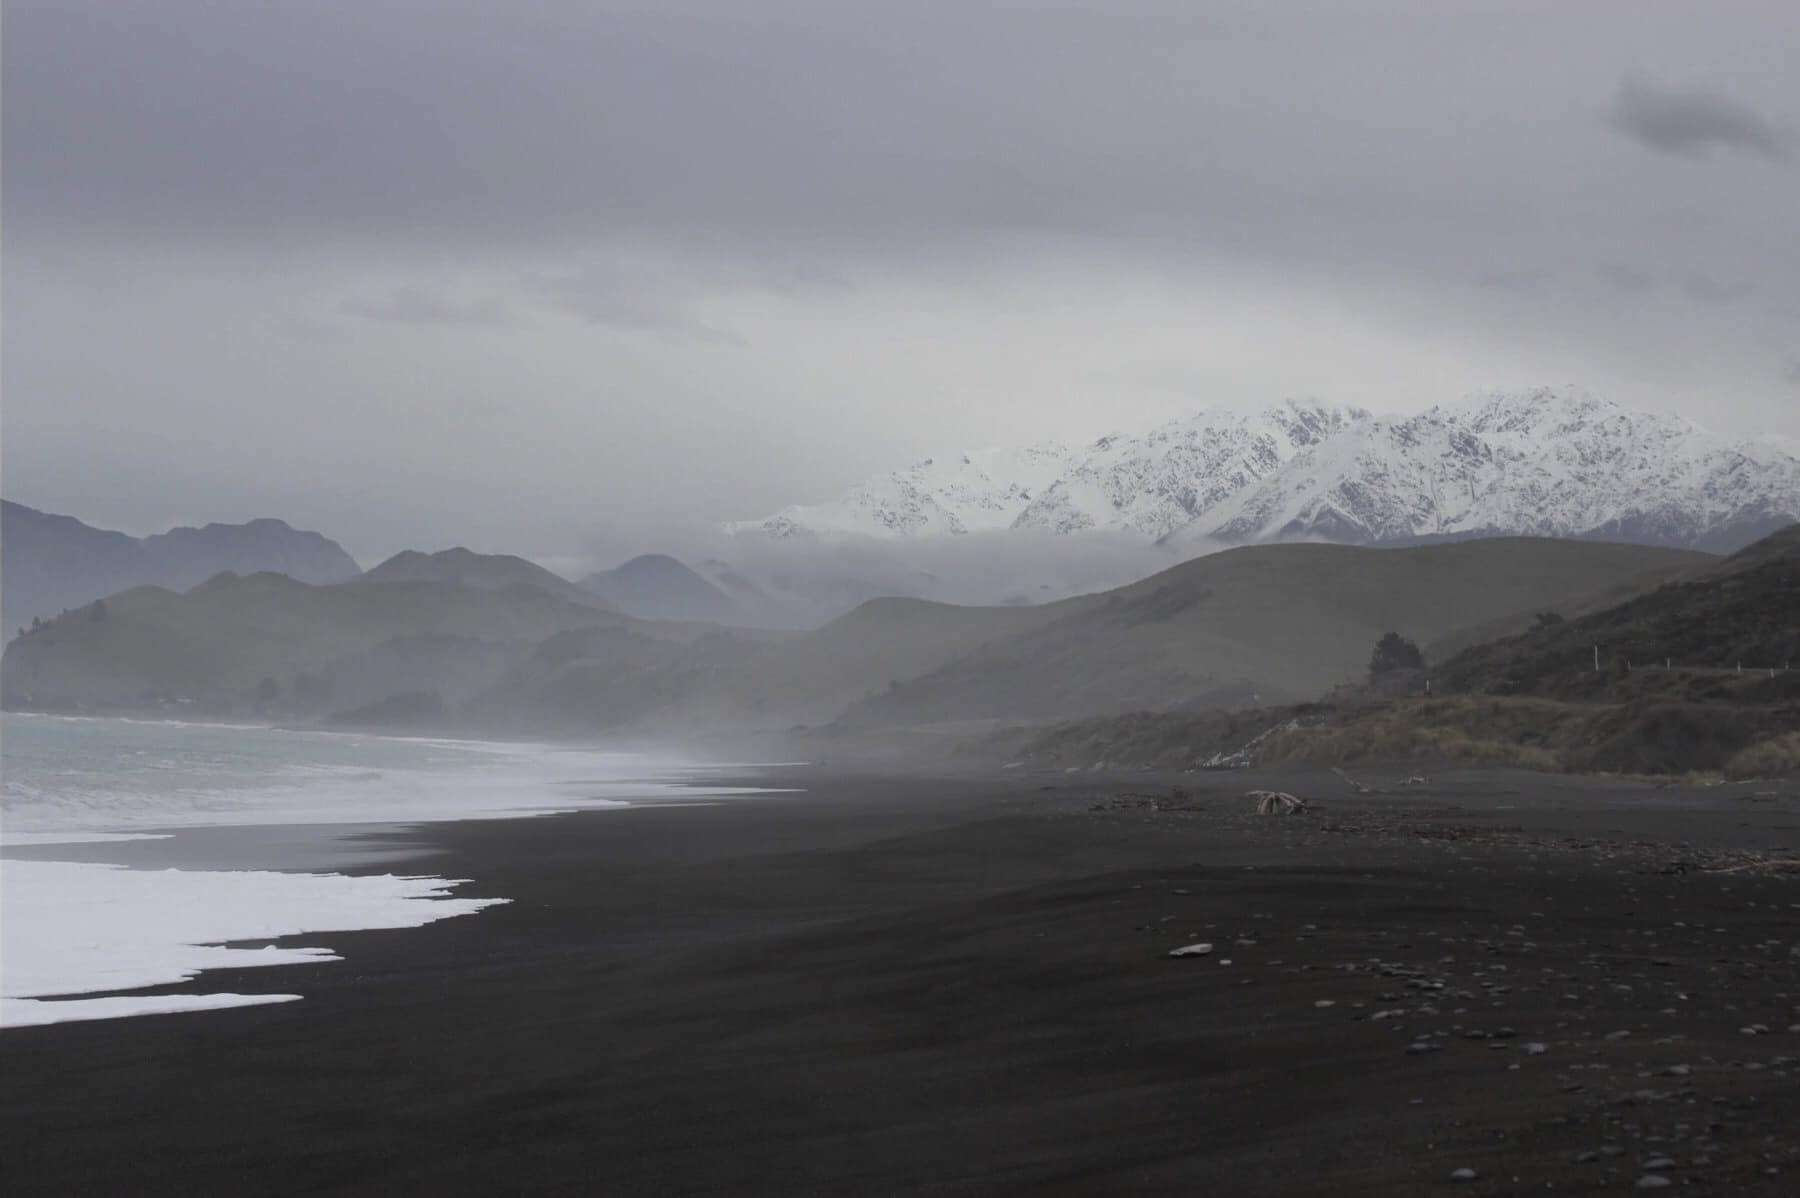 Black sand beach near Kaikoura in New Zealand. Find out if LivingSocial Escapes and Groupon Getaways are good deals or a scam in our Living Social & Groupon travel reviews.